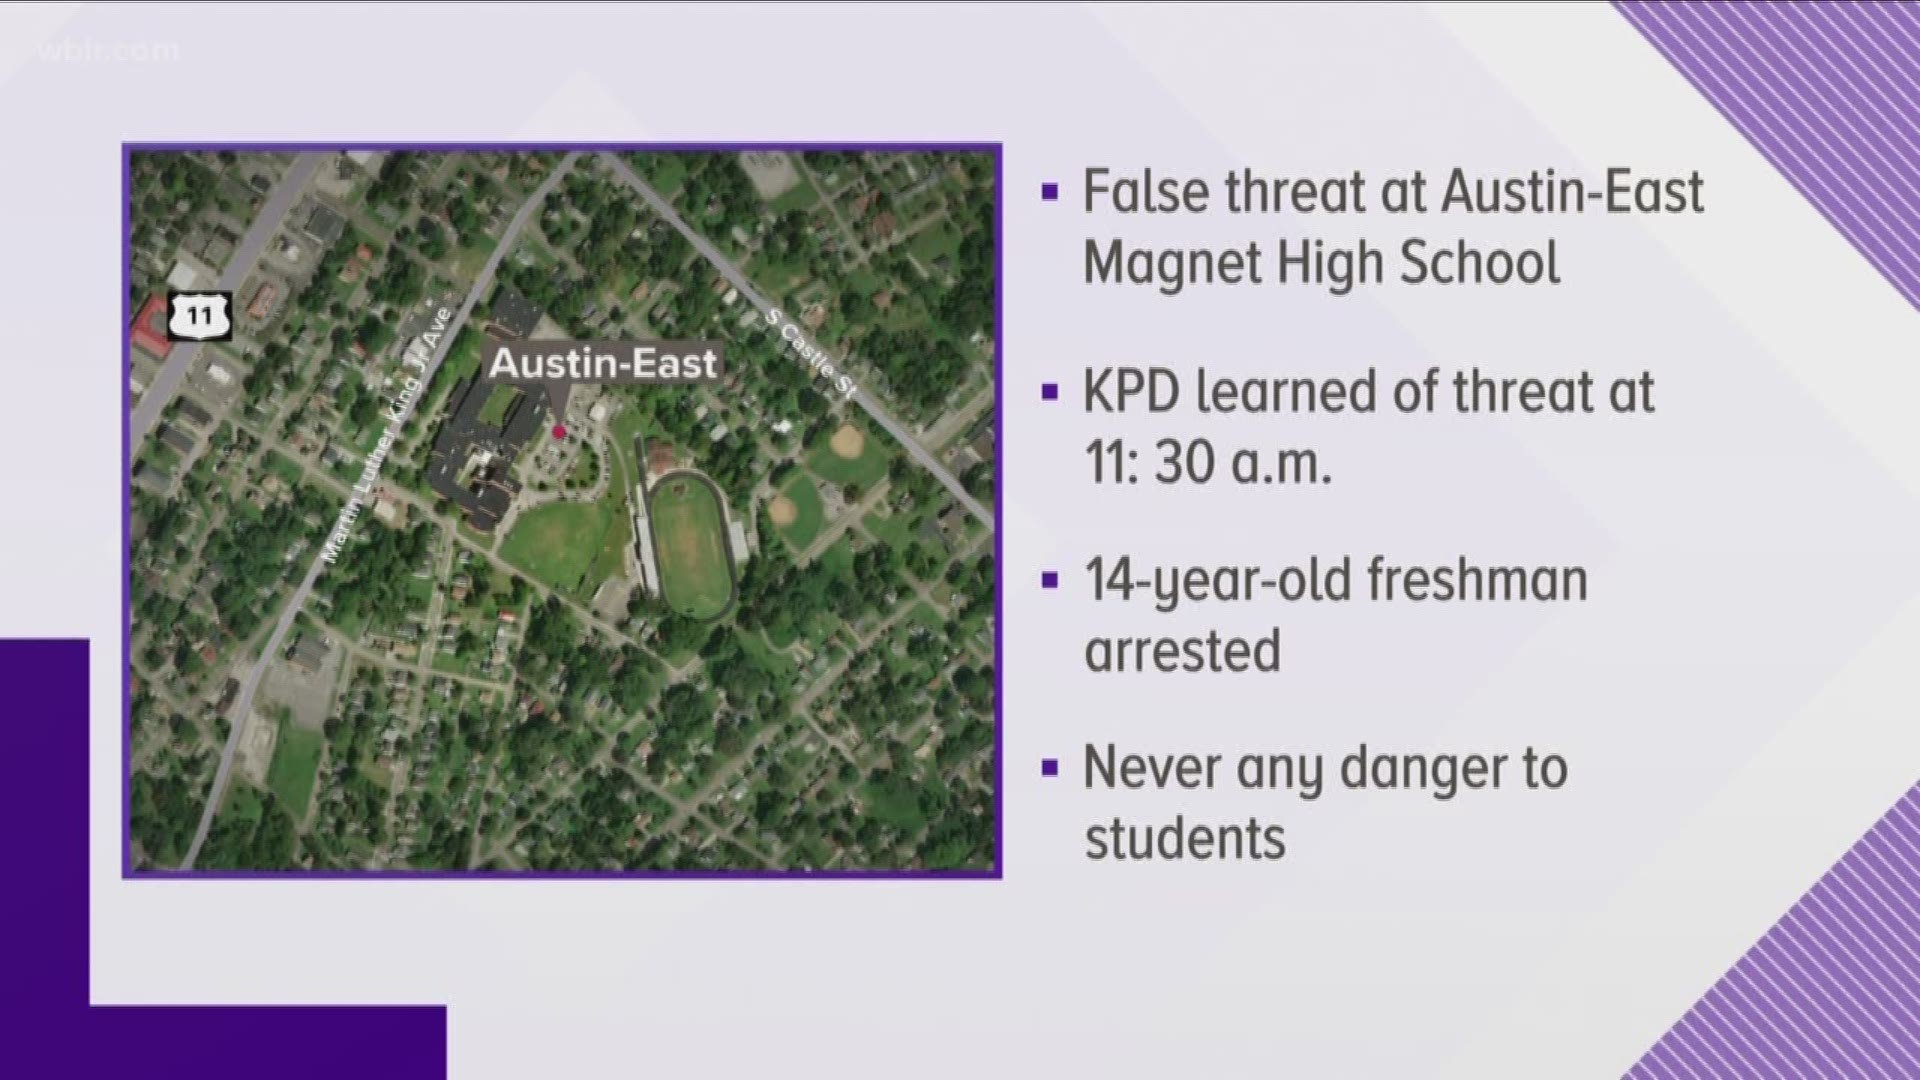 Knoxville police say an Austin-East Magnet High School student is facing charges -- accused of making a false gun report.